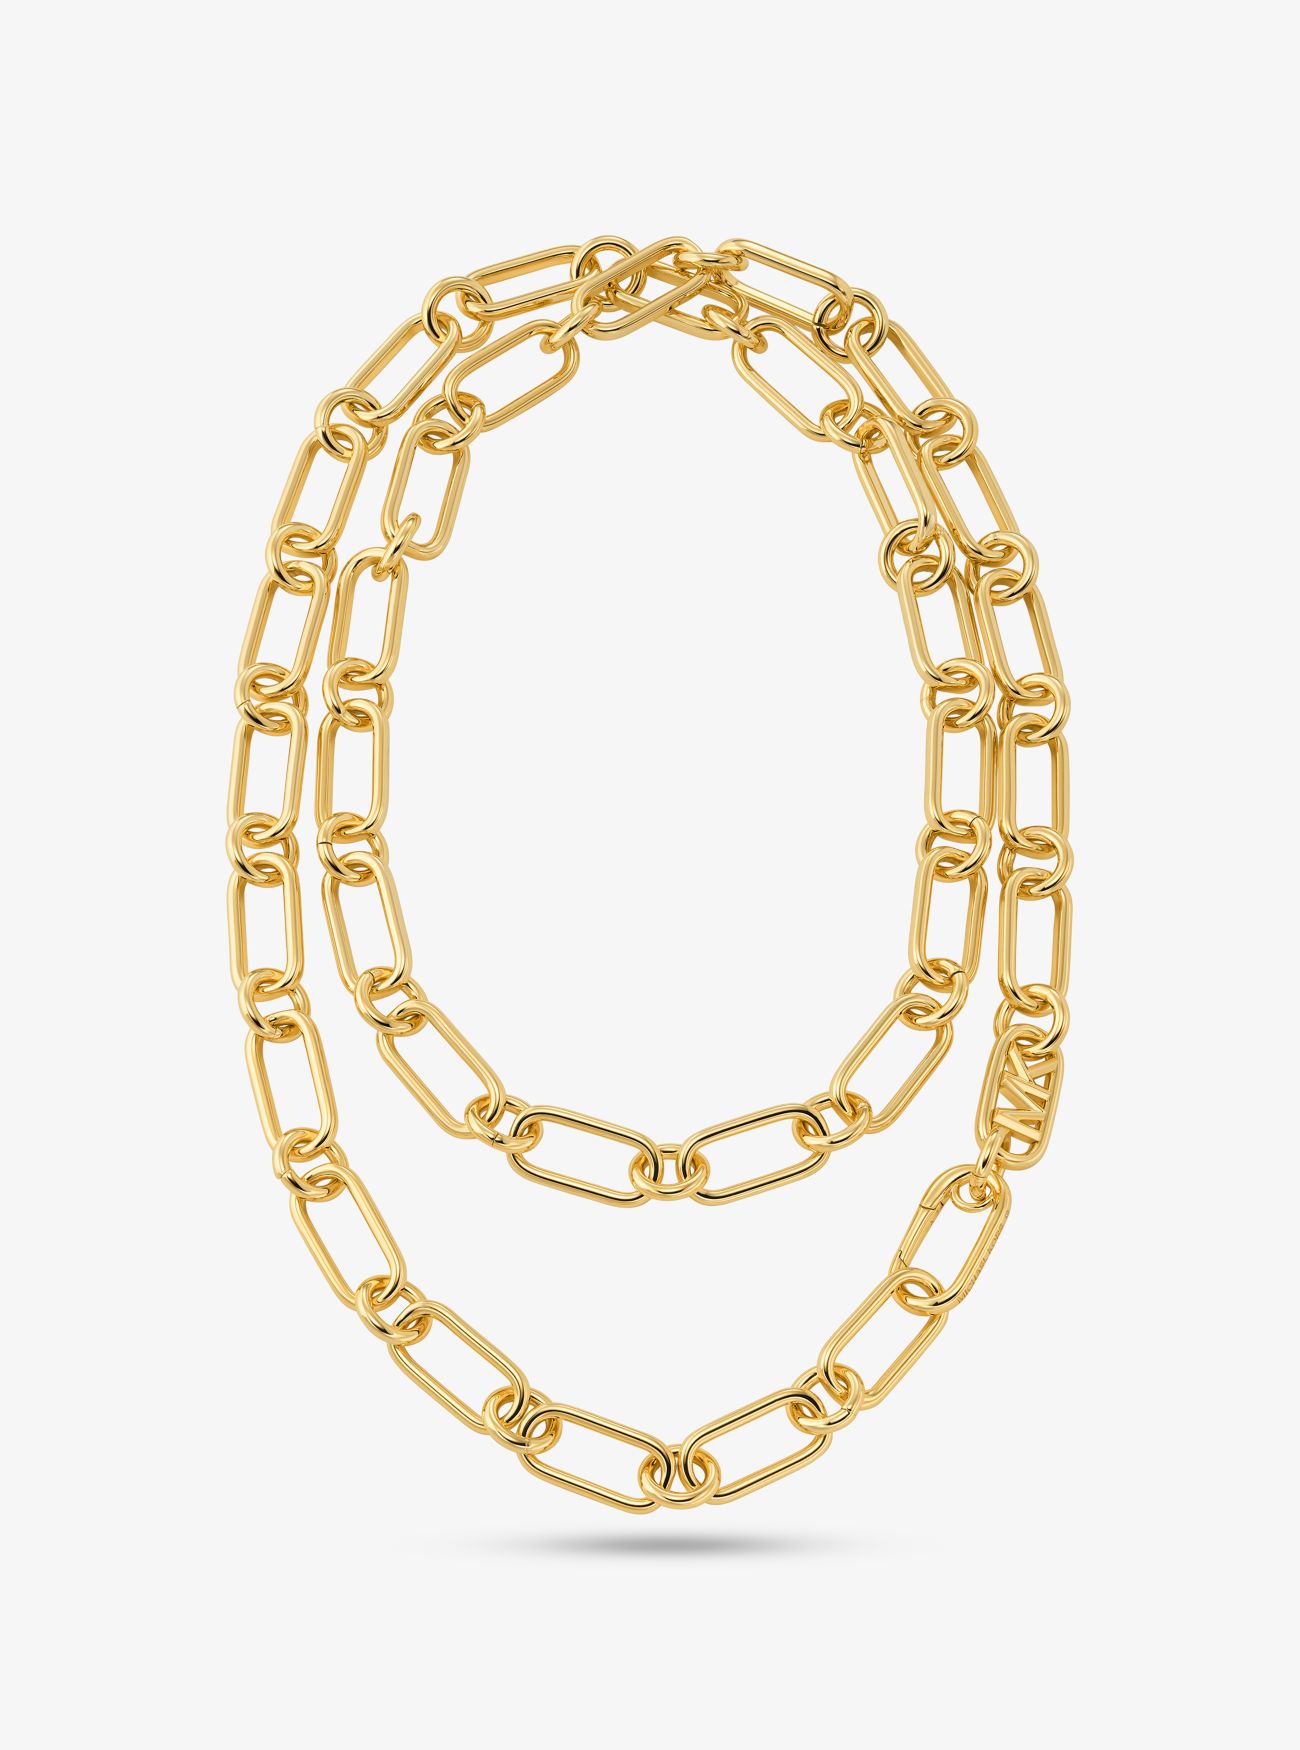 MK Empire Precious Metal-Plated Brass Double Chain-Link Necklace - Gold - Michael Kors